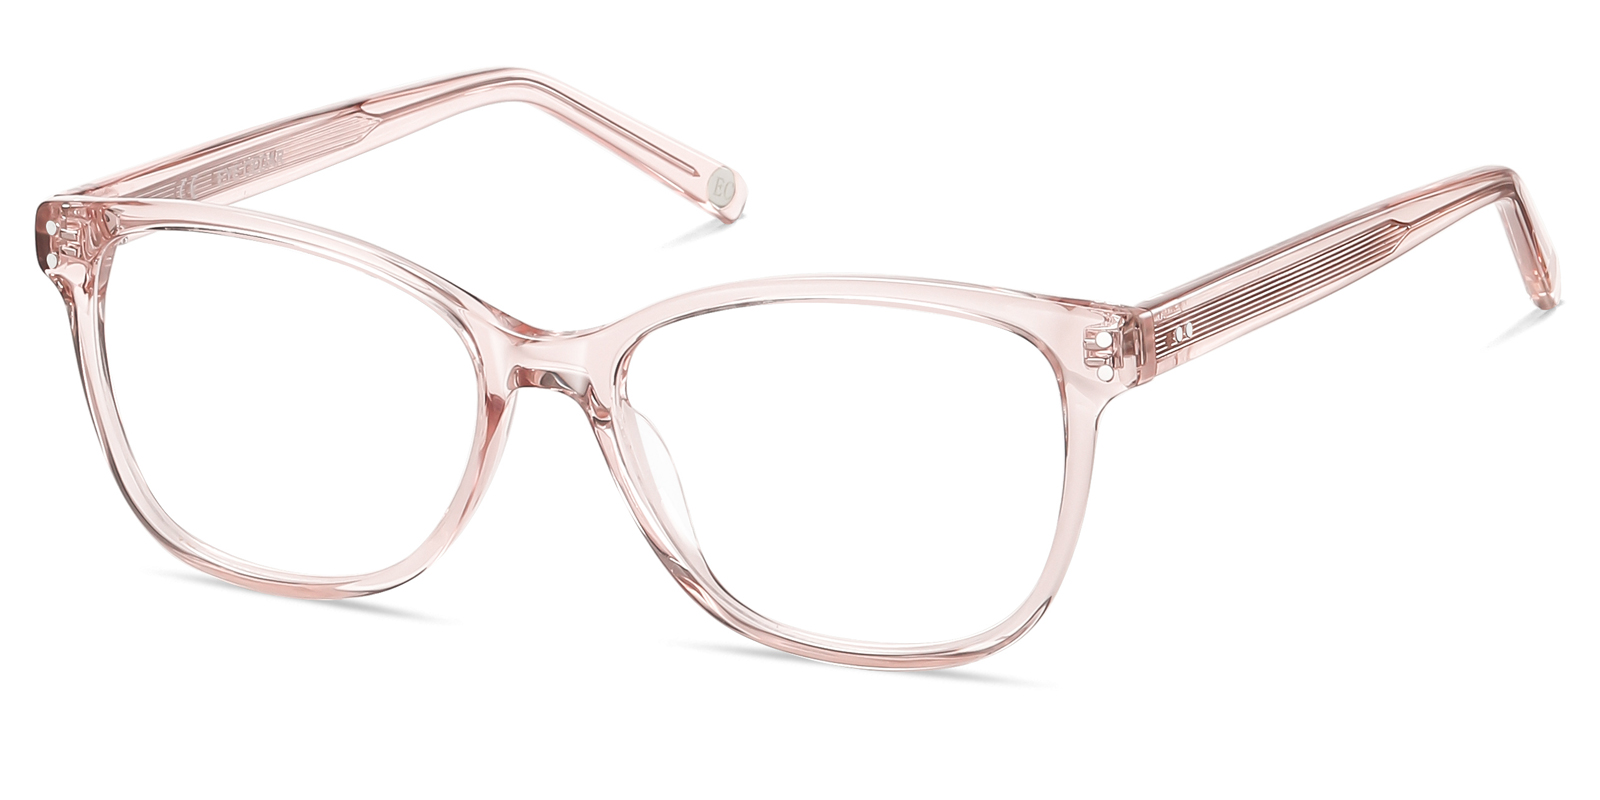 Miya Blue Light Blocking Glasses Women Pink Square Style with 1.57 Mid-Index Resin Lenses Computer Glasses